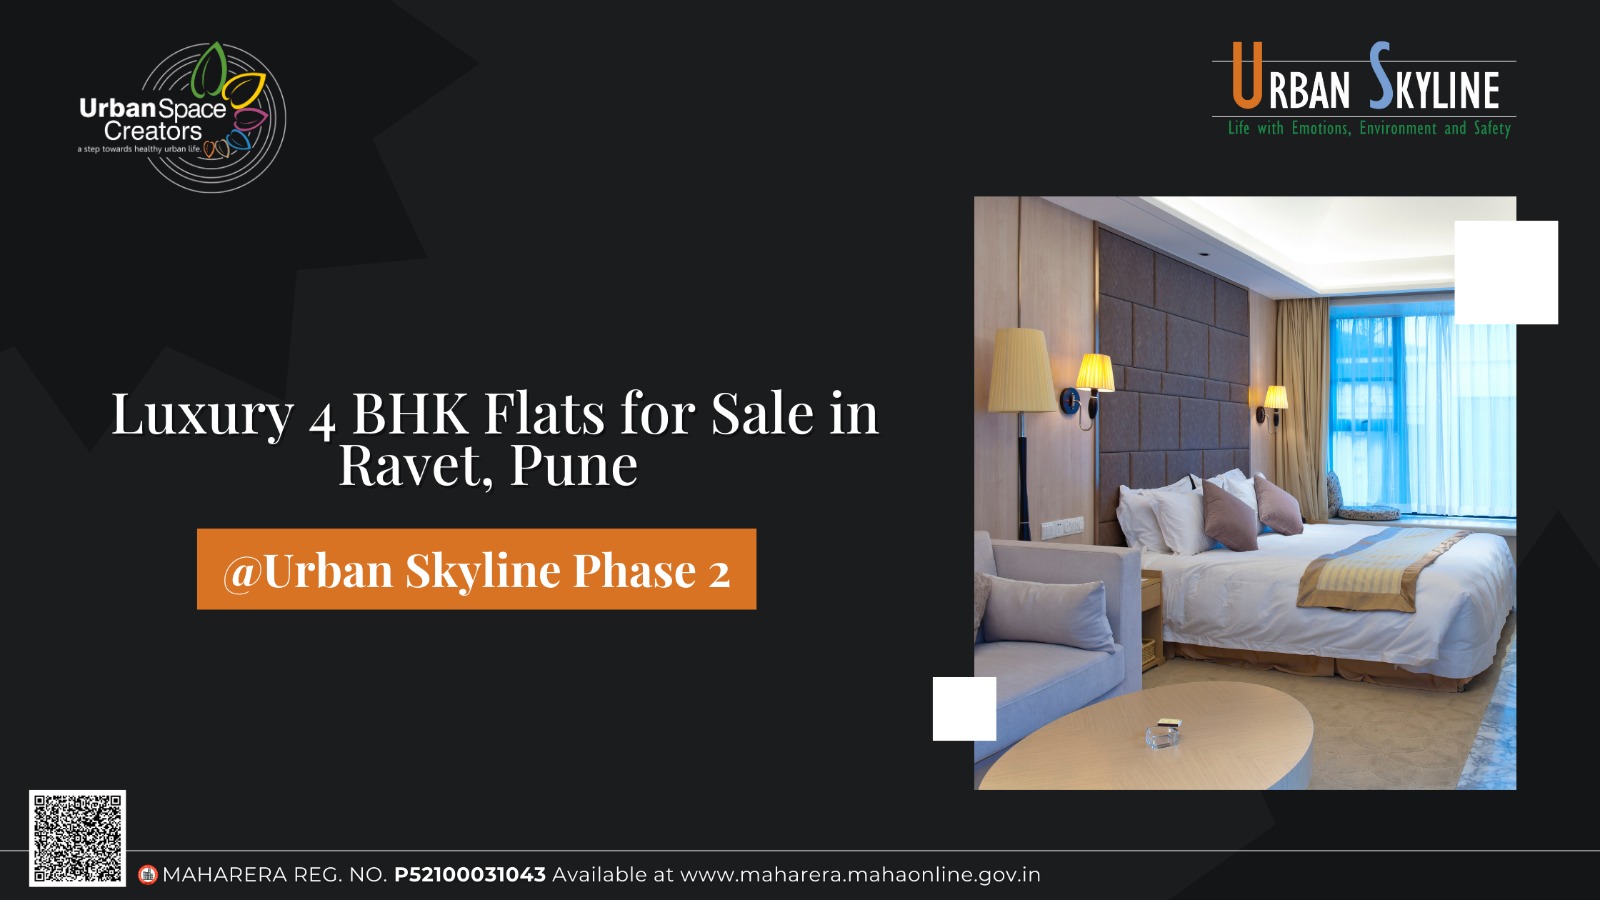 Luxury 4 BHK Flats for Sale in Ravet, Pune at Urban Skyline Phase 2